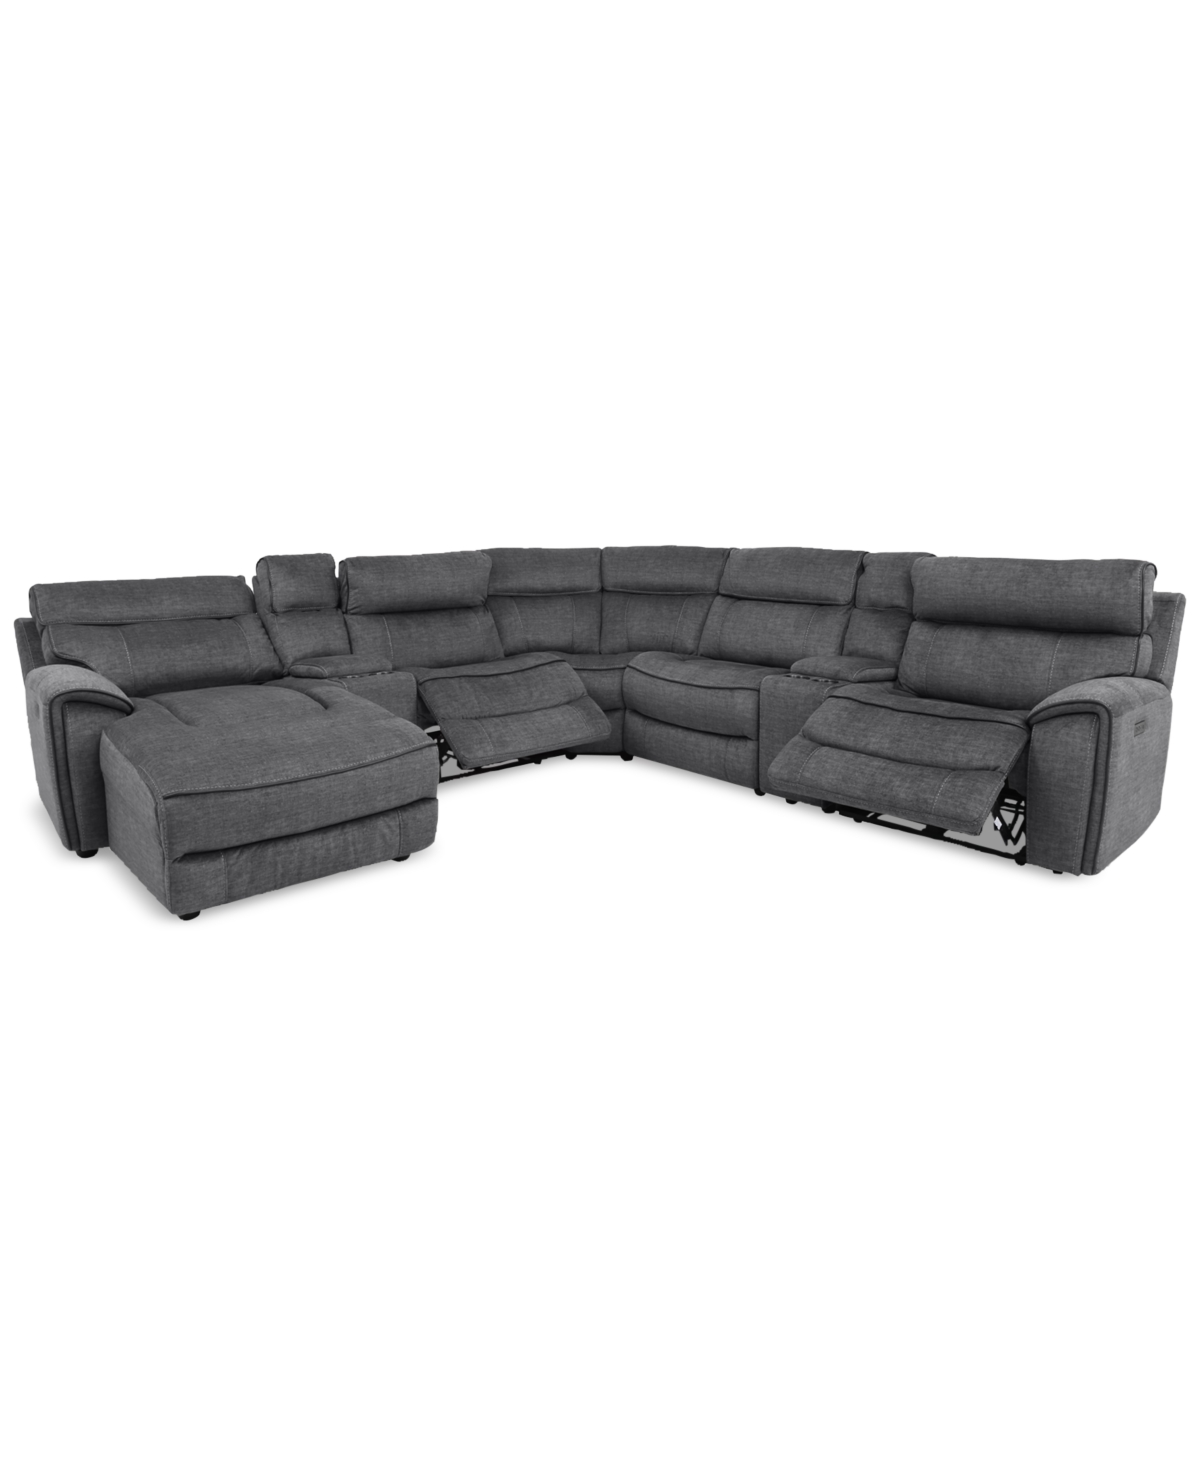 Furniture Hutchenson 7-pc. Fabric Chaise Sectional With 2 Power Recliners And 2usb Consoles In Charcoal Moss